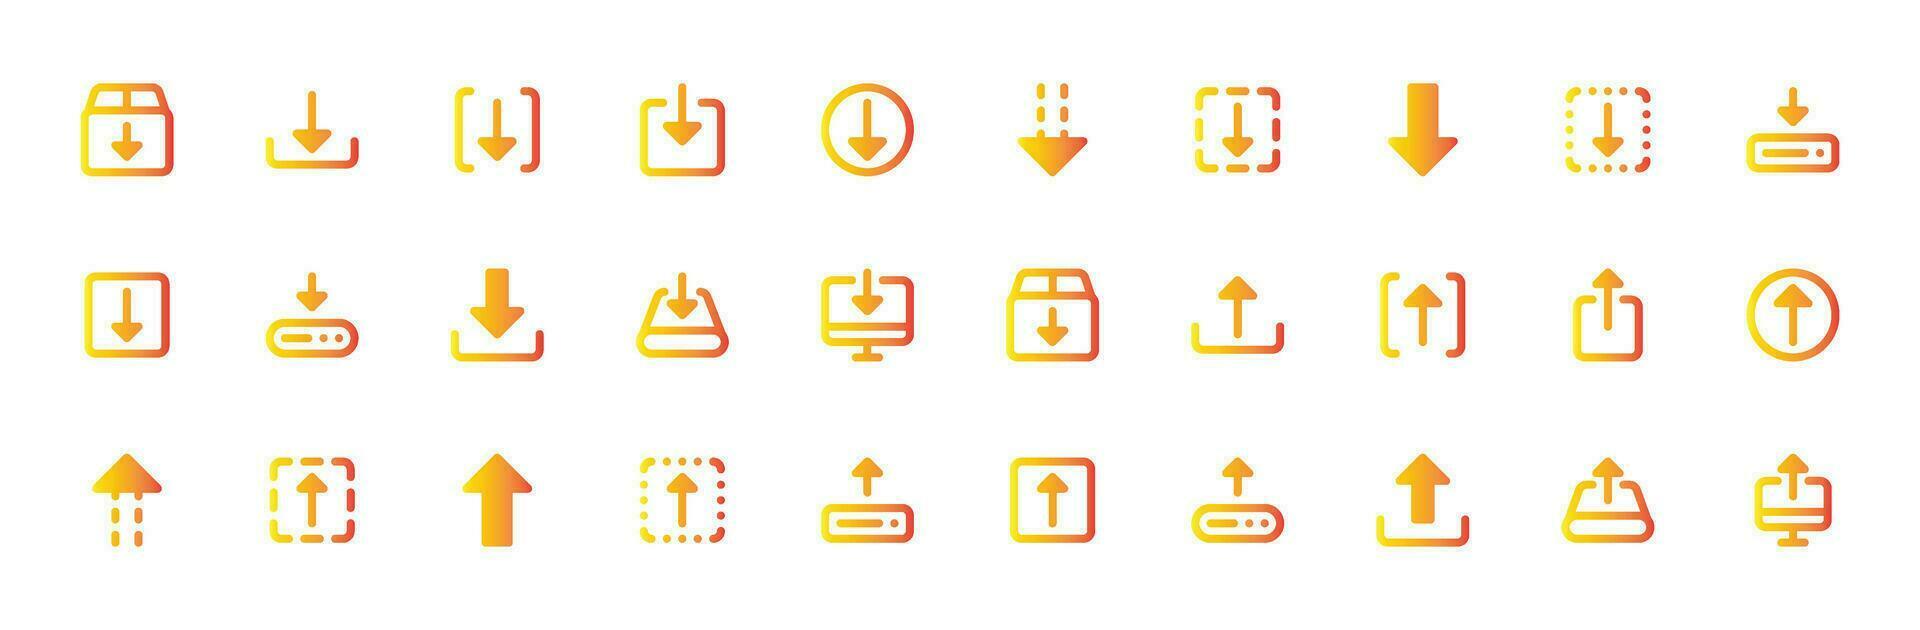 Download Upload Icons Set - File Transfer, Data Exchange Vector Collection